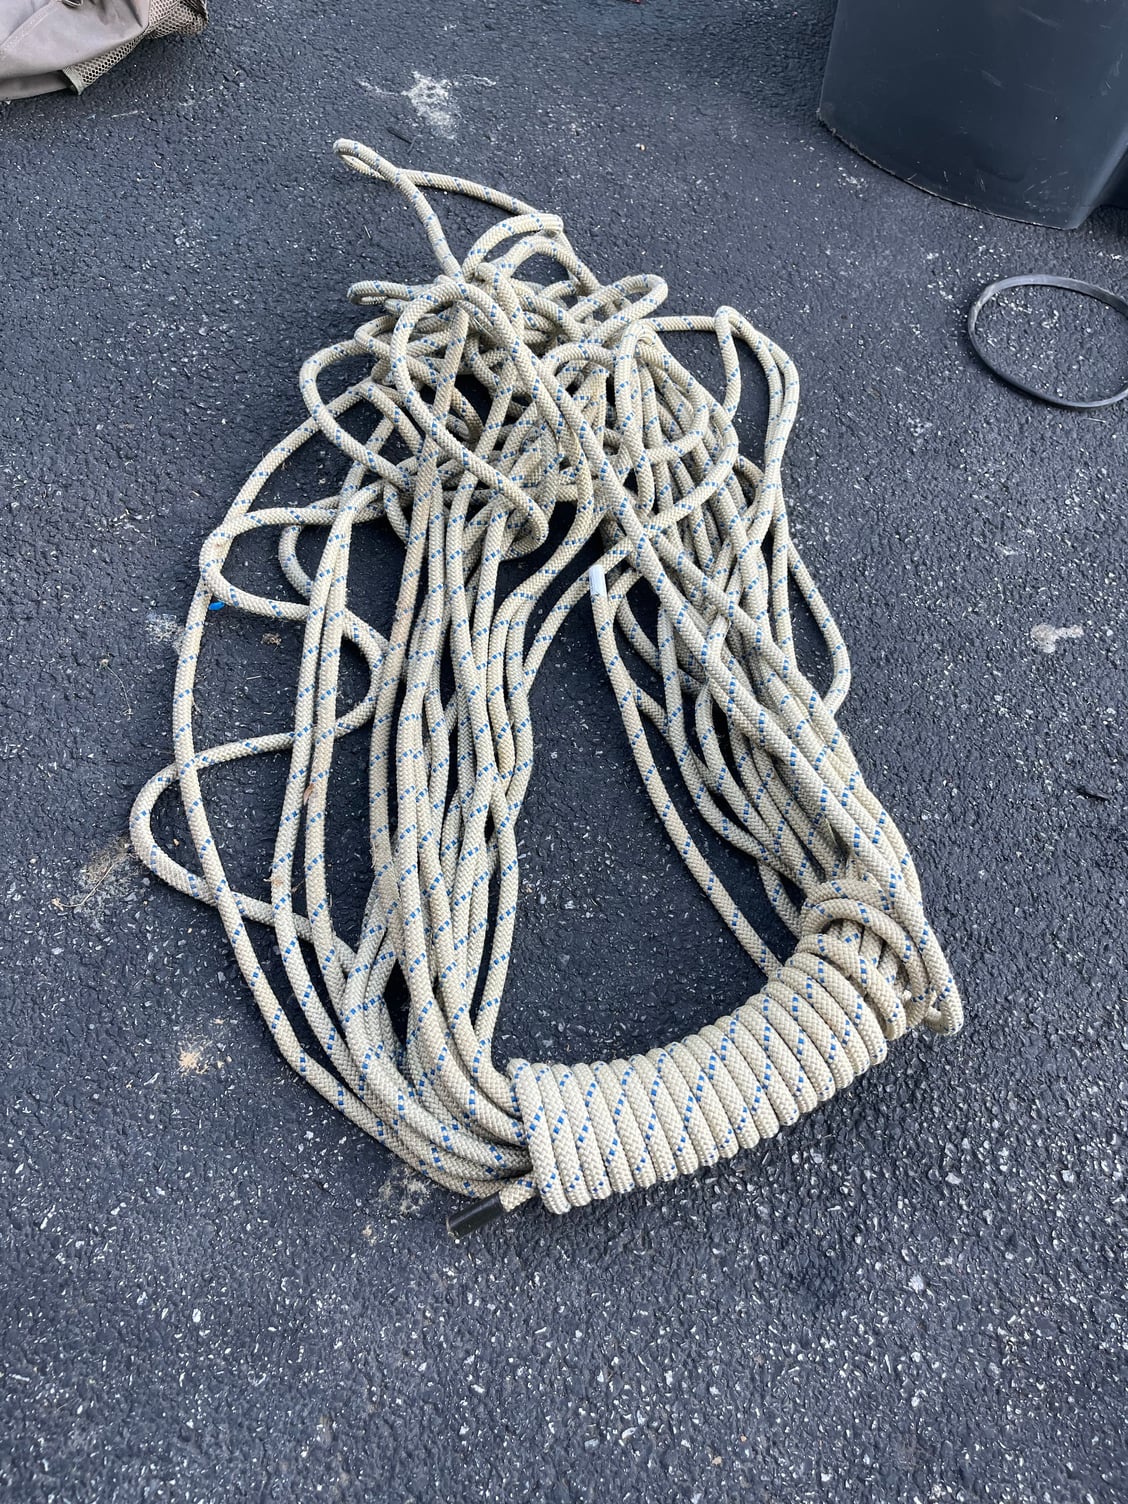 Using climbing rope for dock lines - The Hull Truth - Boating and